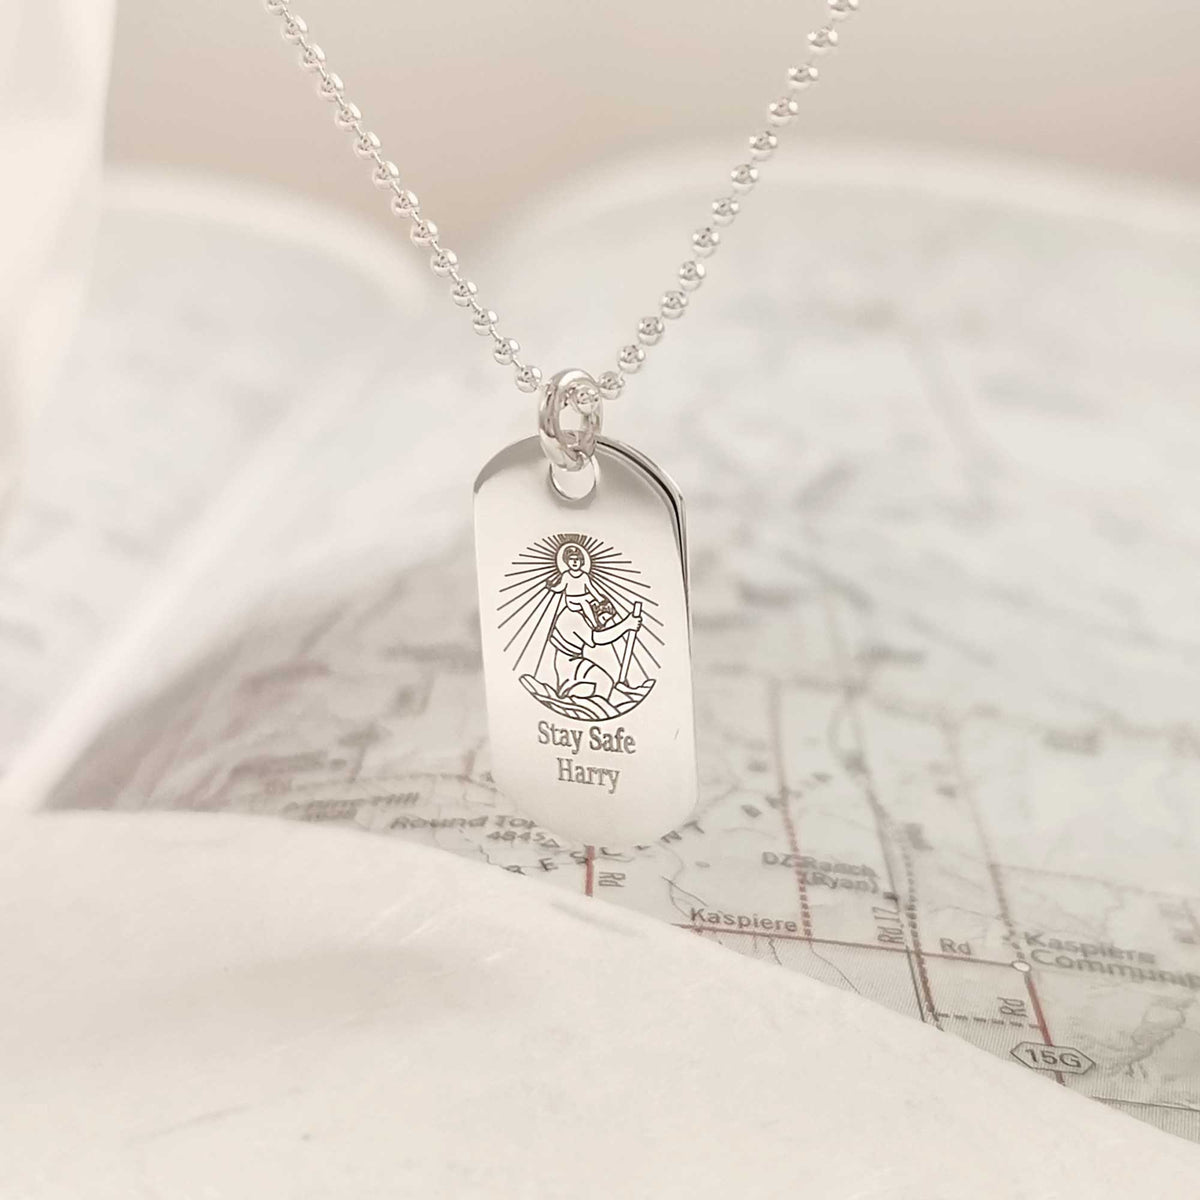 skinny silver dog tag st christopher necklace personalised mens gift name stay safe ball chain off the map travel jewellery